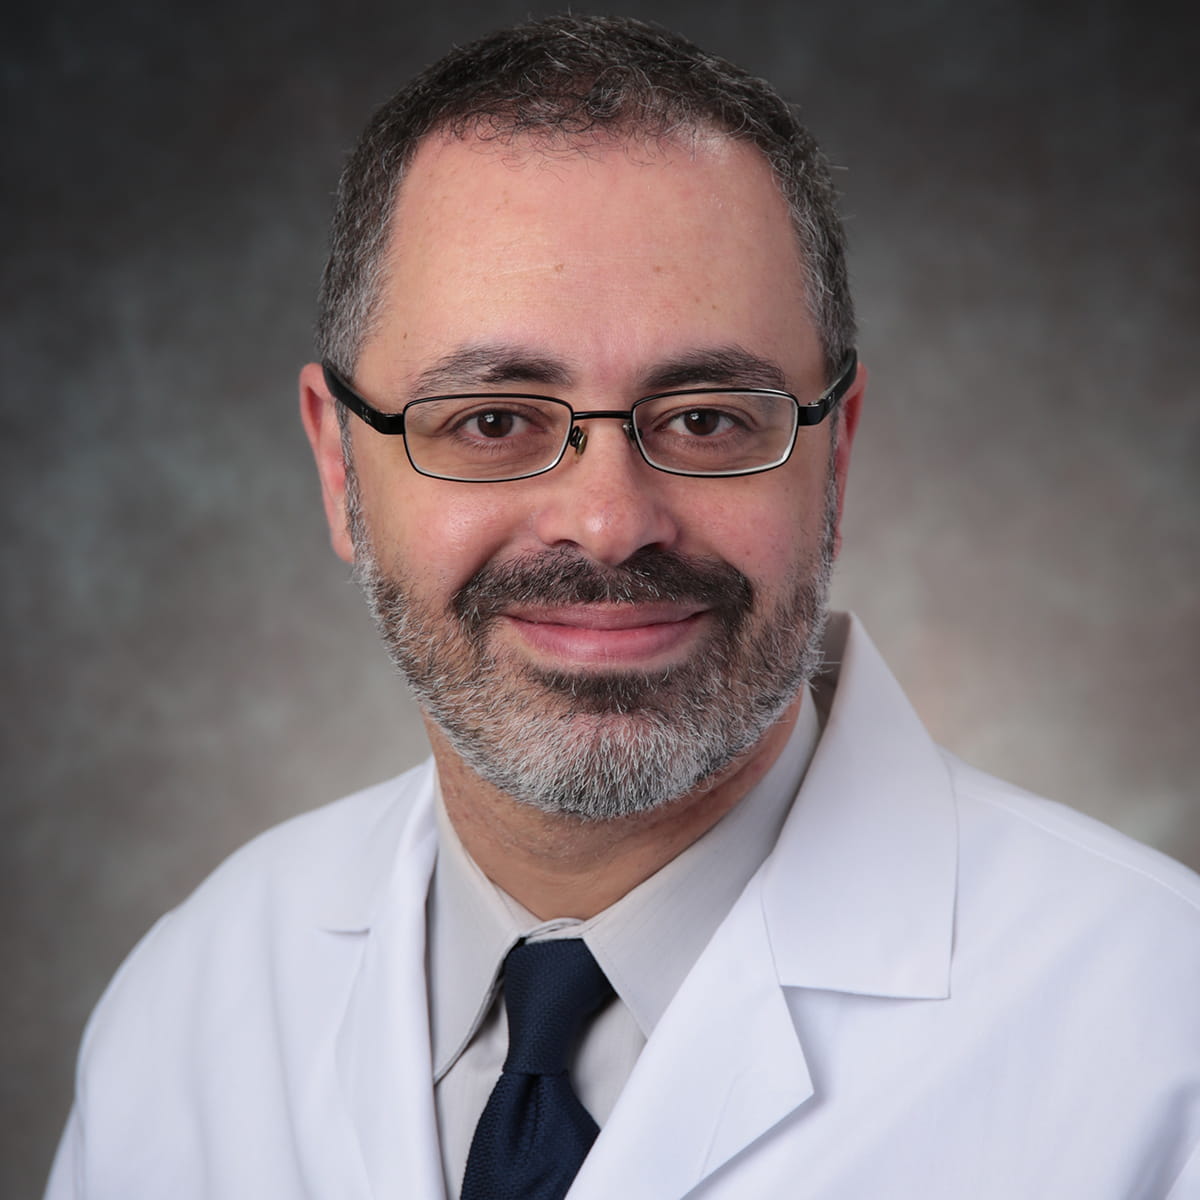 A friendly headshot of Maged Doss, MD